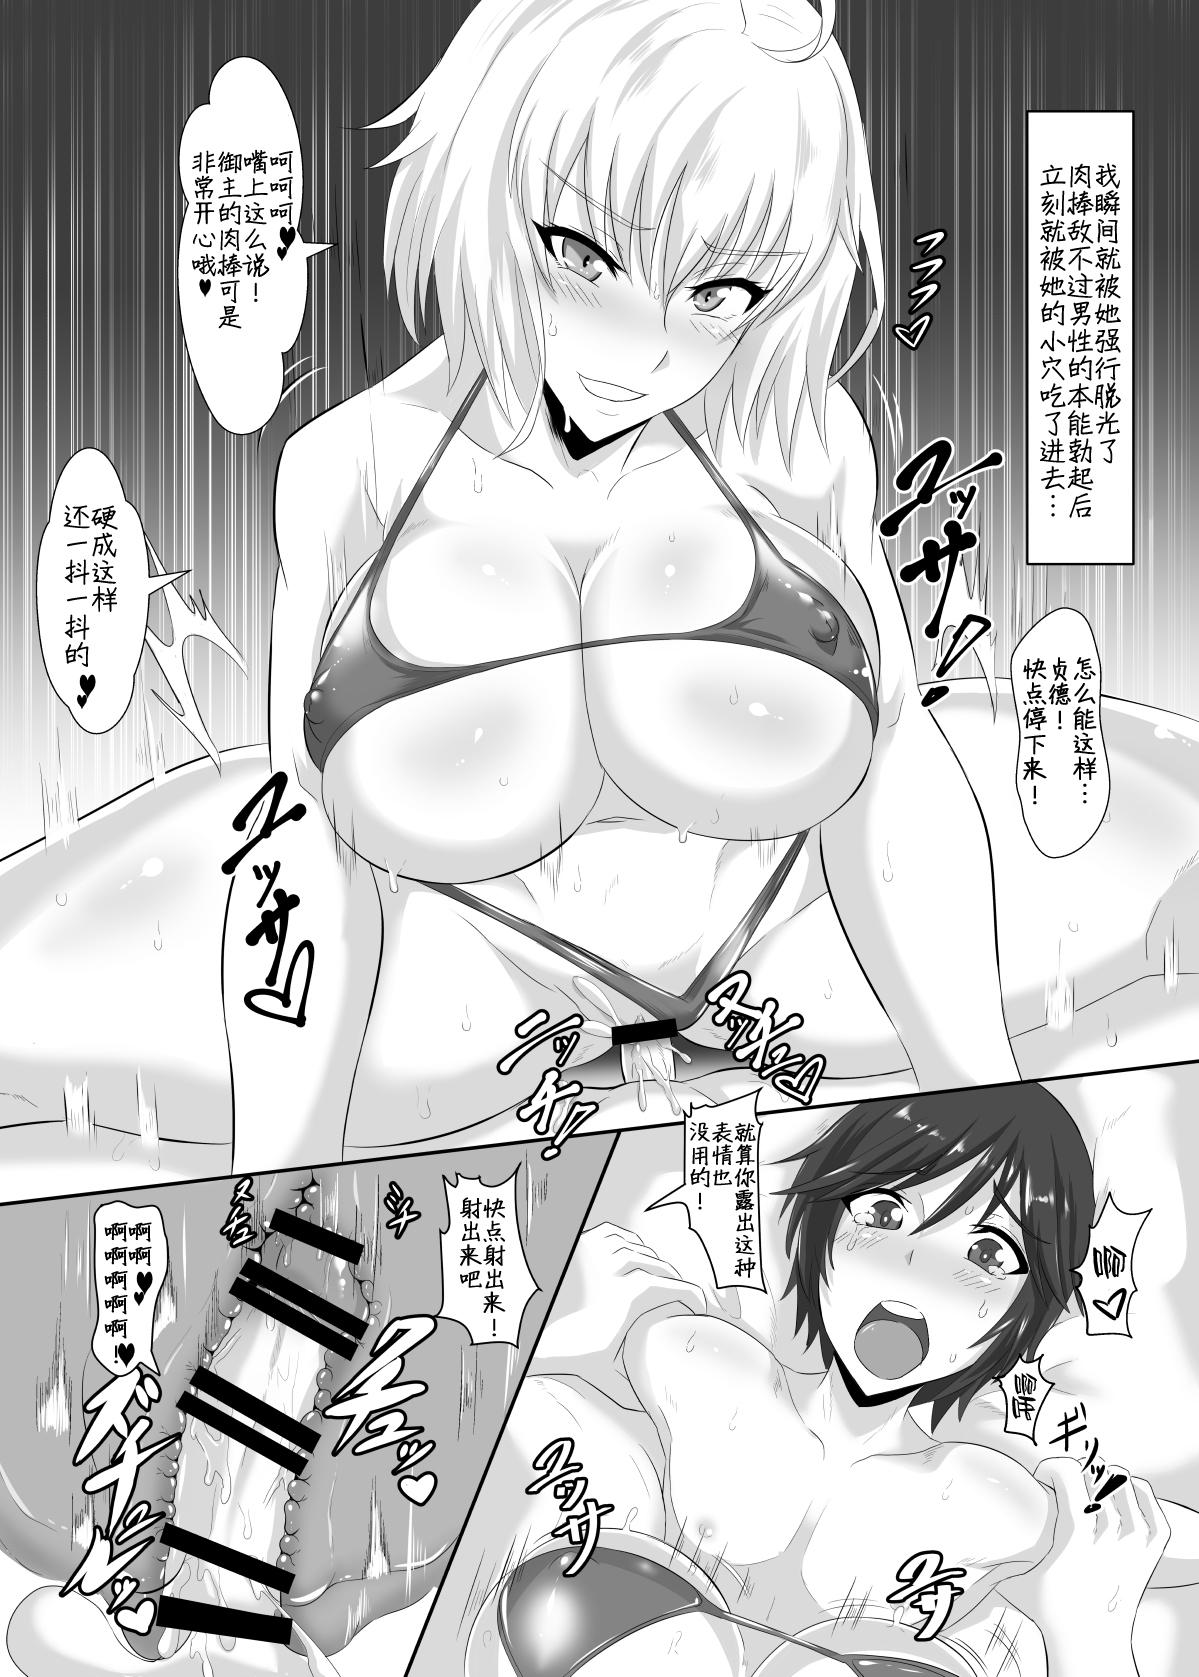 Blows Gehenna 6 - Fate grand order Small Tits - Page 4